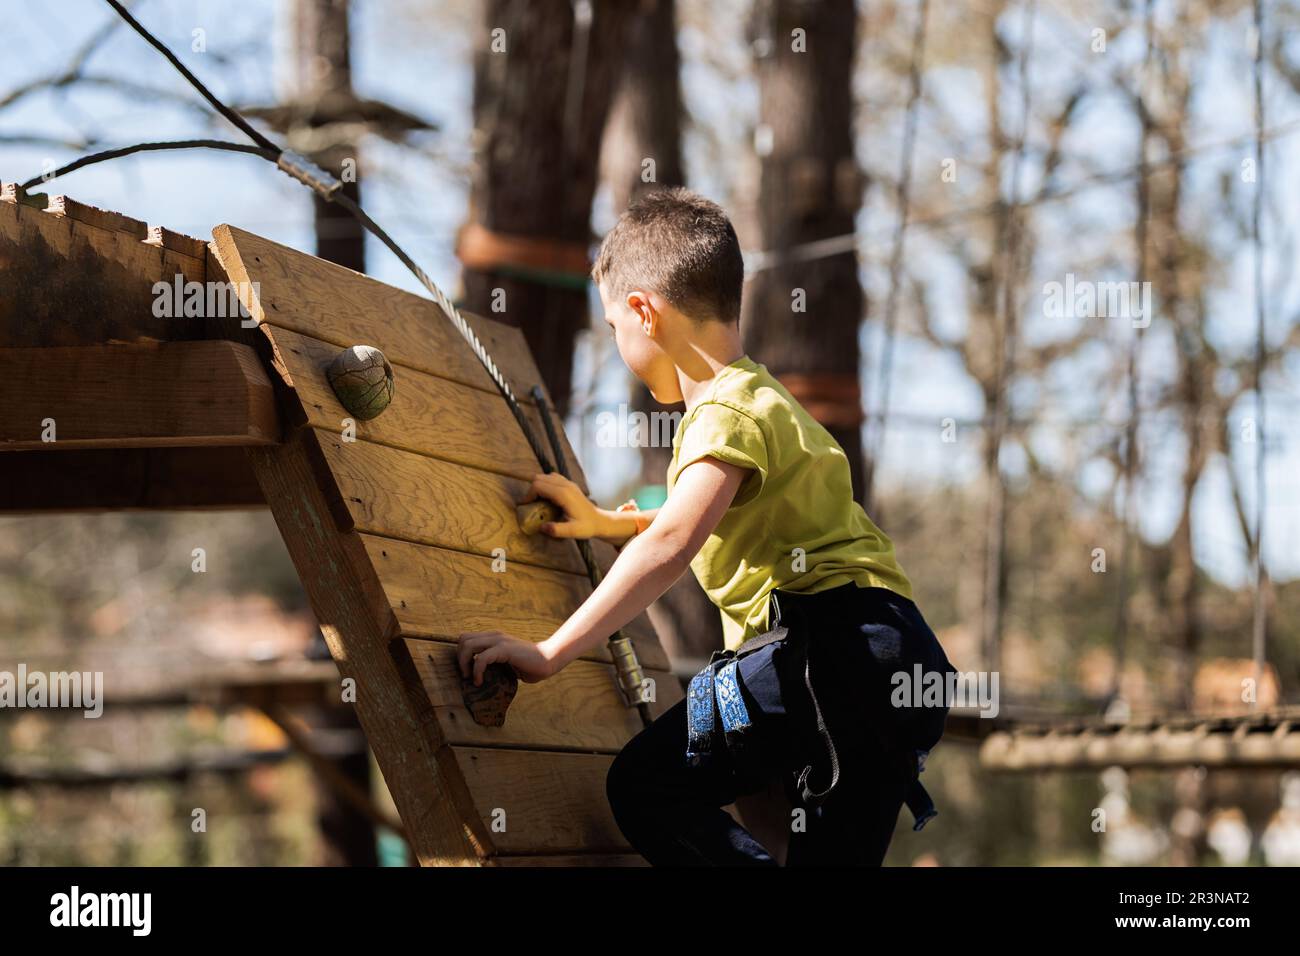 Concentrated preteen boy in casual clothes with safety equipment on climbing wall of wooden construction against blurred trees in sunny rope park Stock Photo